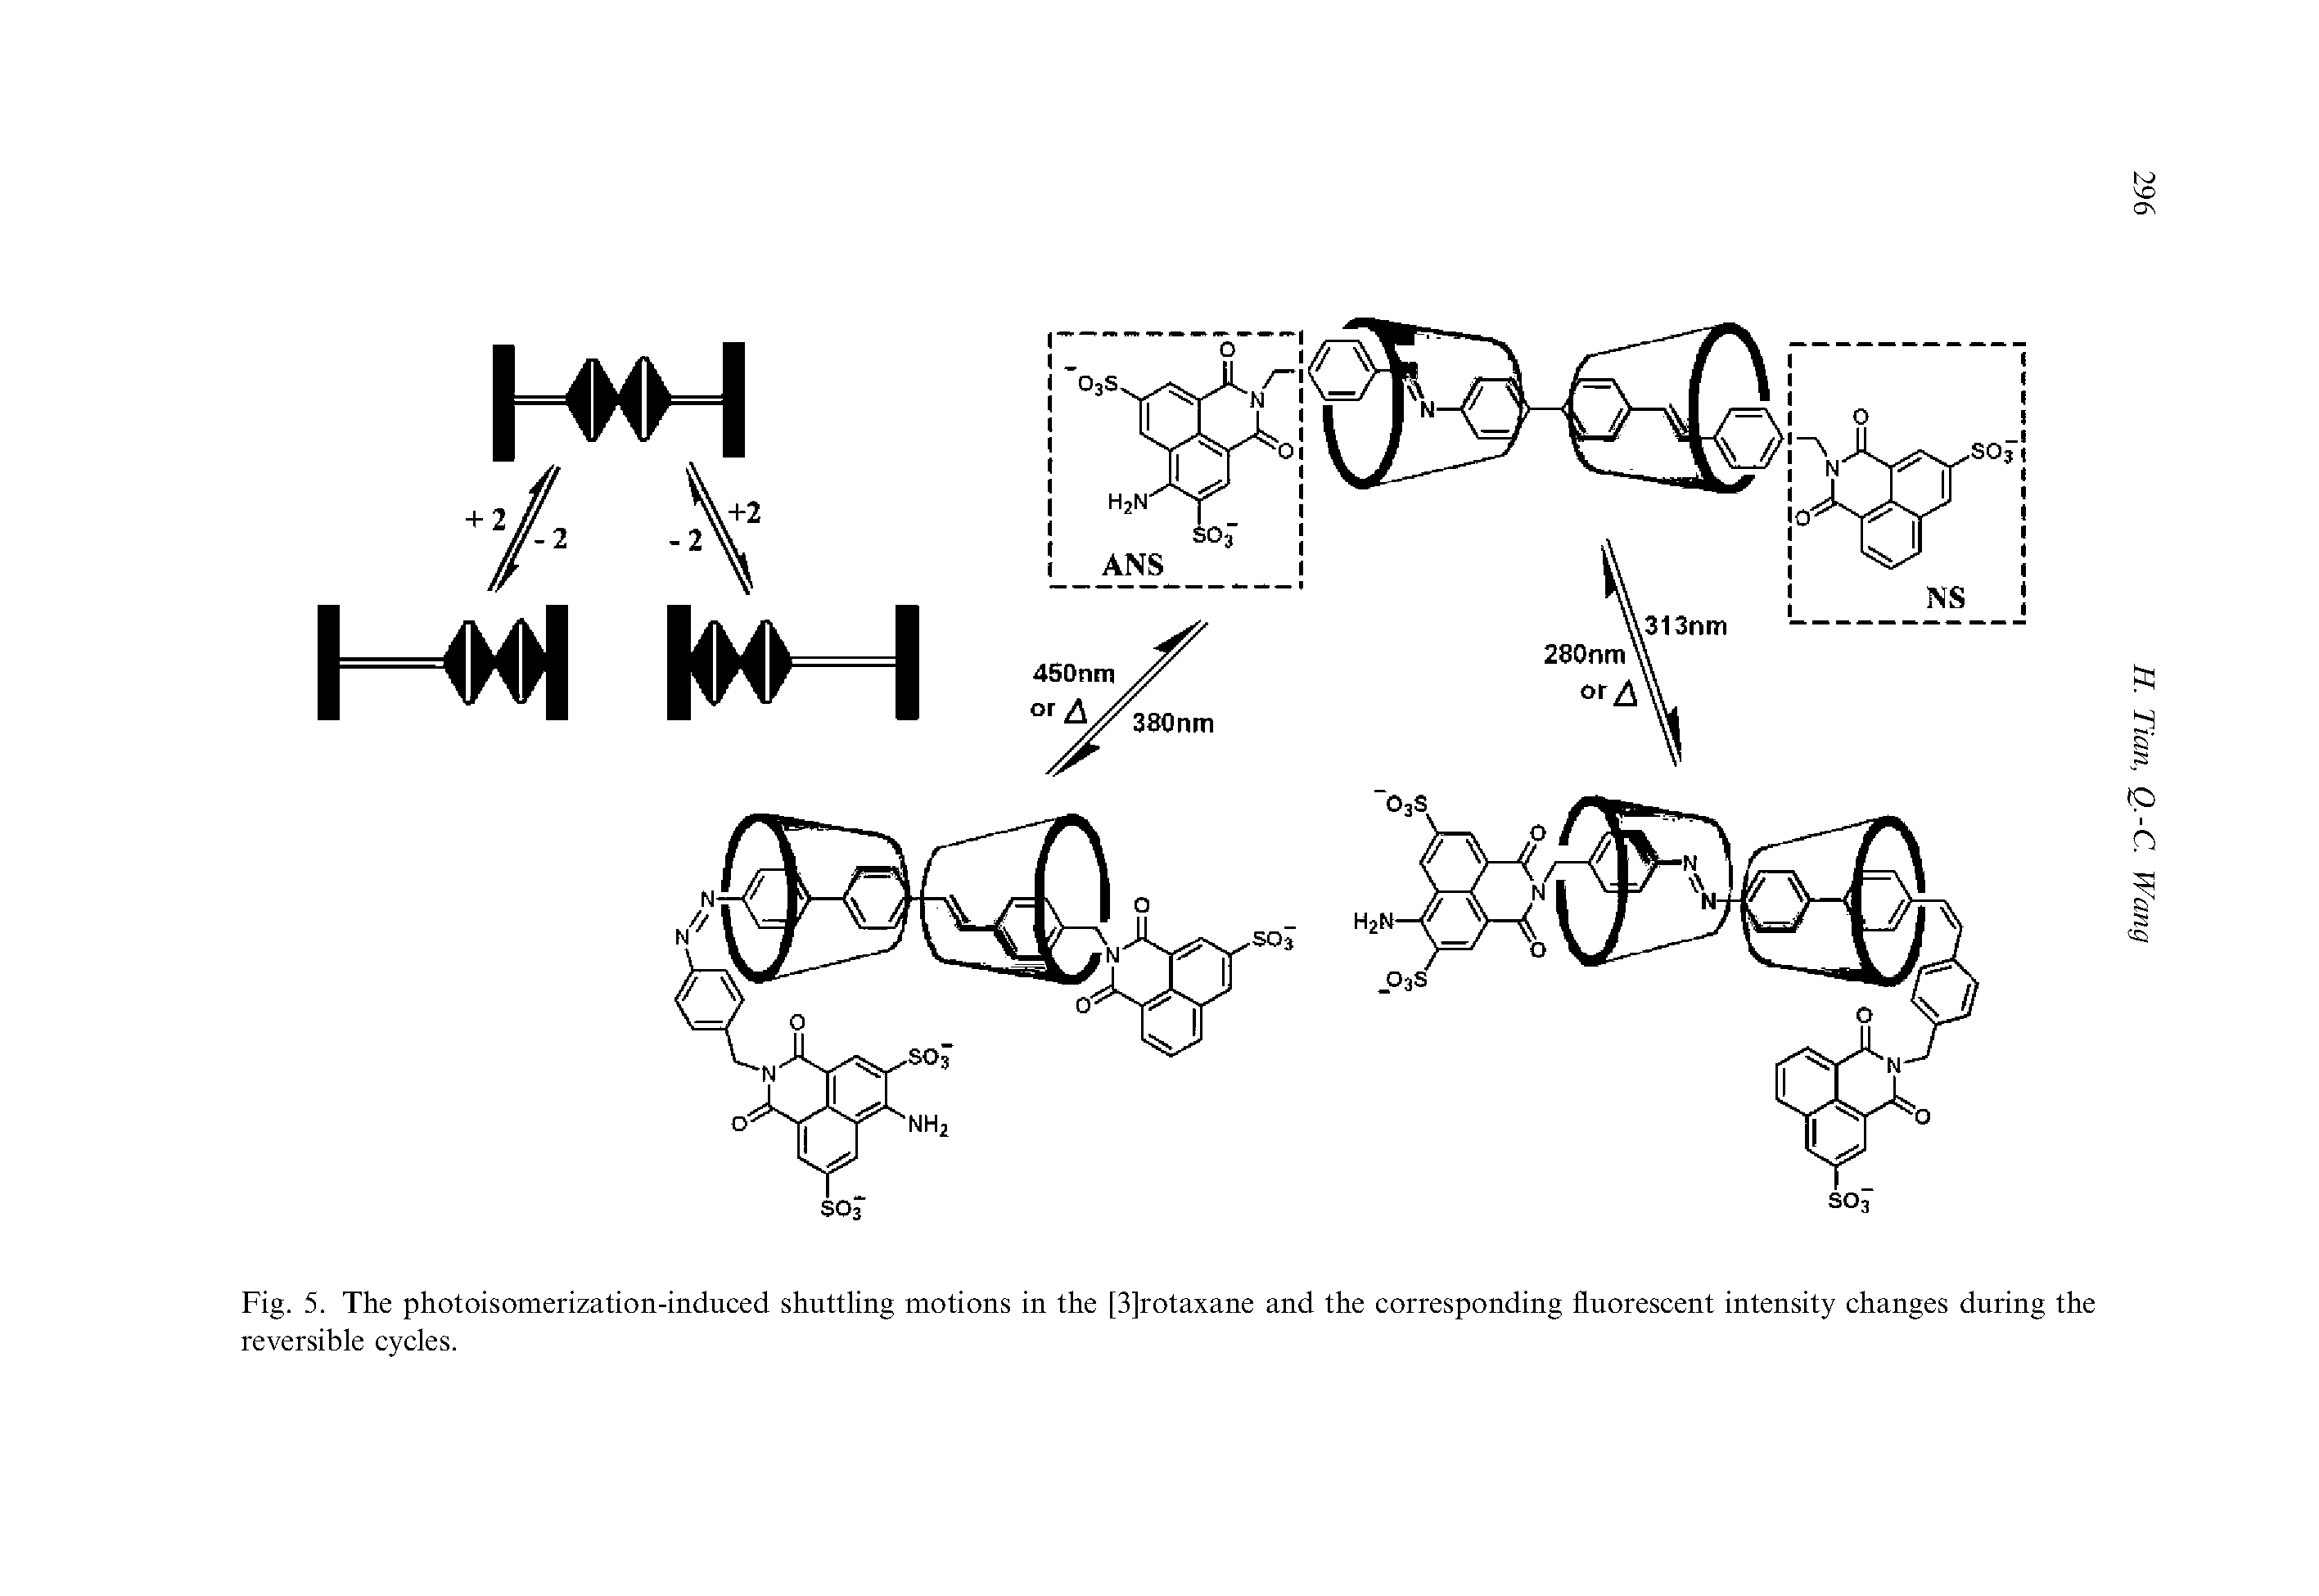 Fig. 5. The photoisomerization-induced shuttling motions in the [3]rotaxane and the corresponding fluorescent intensity changes during the reversible cycles.